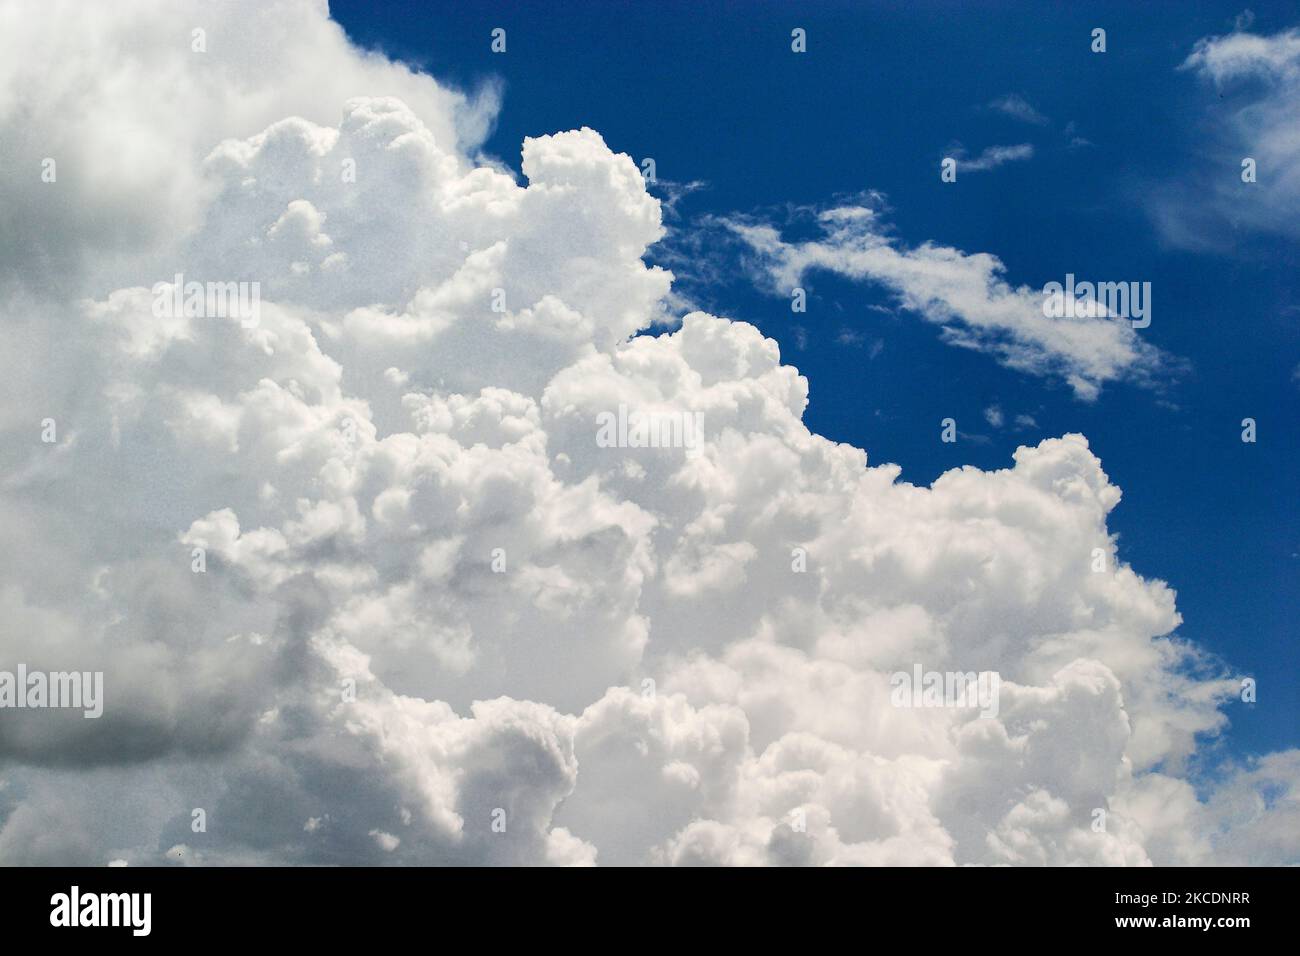 Extreme clouds Stock Photo